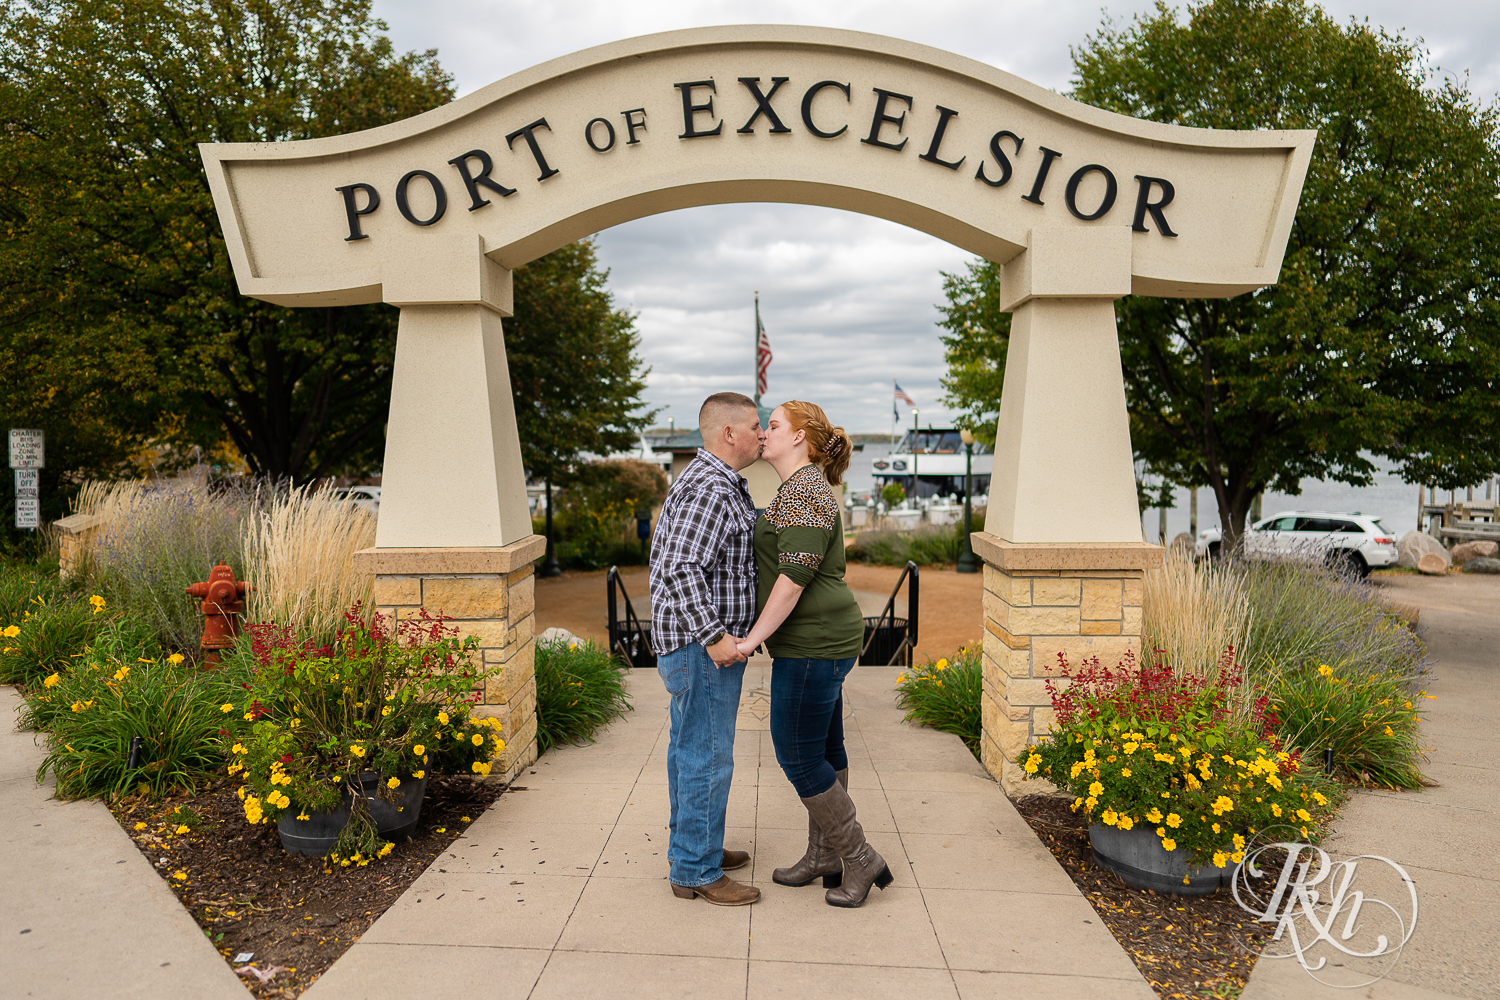 Man in flannel and jeans kisses woman in sweater and jeans in front of Port Excelsior sign in Excelsior, Minnesota.